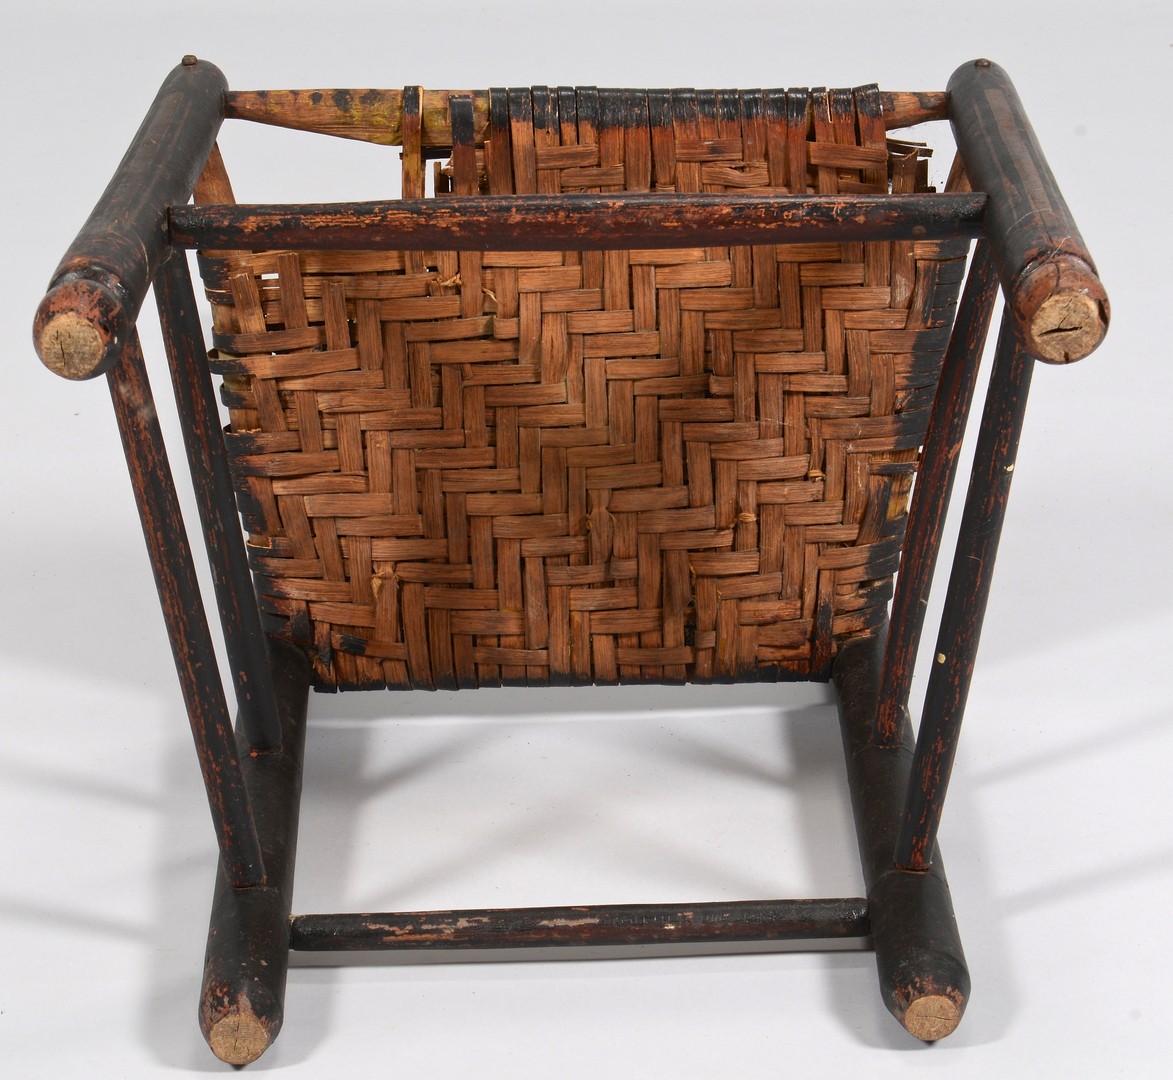 Lot 283: Group 5 Ladder Back Chairs, 19th c.